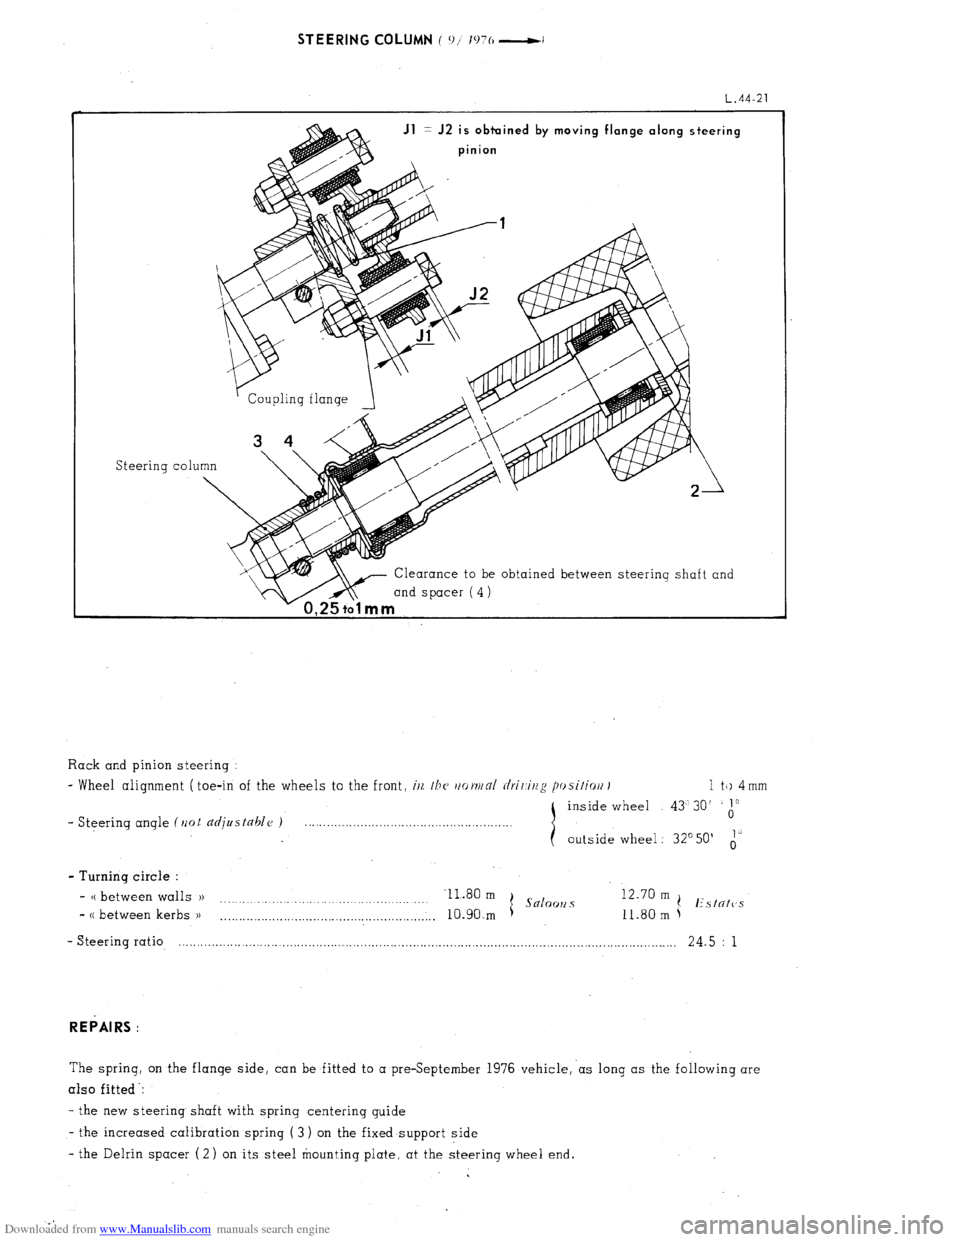 Citroen CX 1983 1.G Workshop Manual Downloaded from www.Manualslib.com manuals search engine STEERING COLUMN ( ‘11’ l’)‘o -1 
L.44-21 
Jl = J2 is obtuined by moving flange along steering 
pinion 
Steering co1 
Clearance to be ob